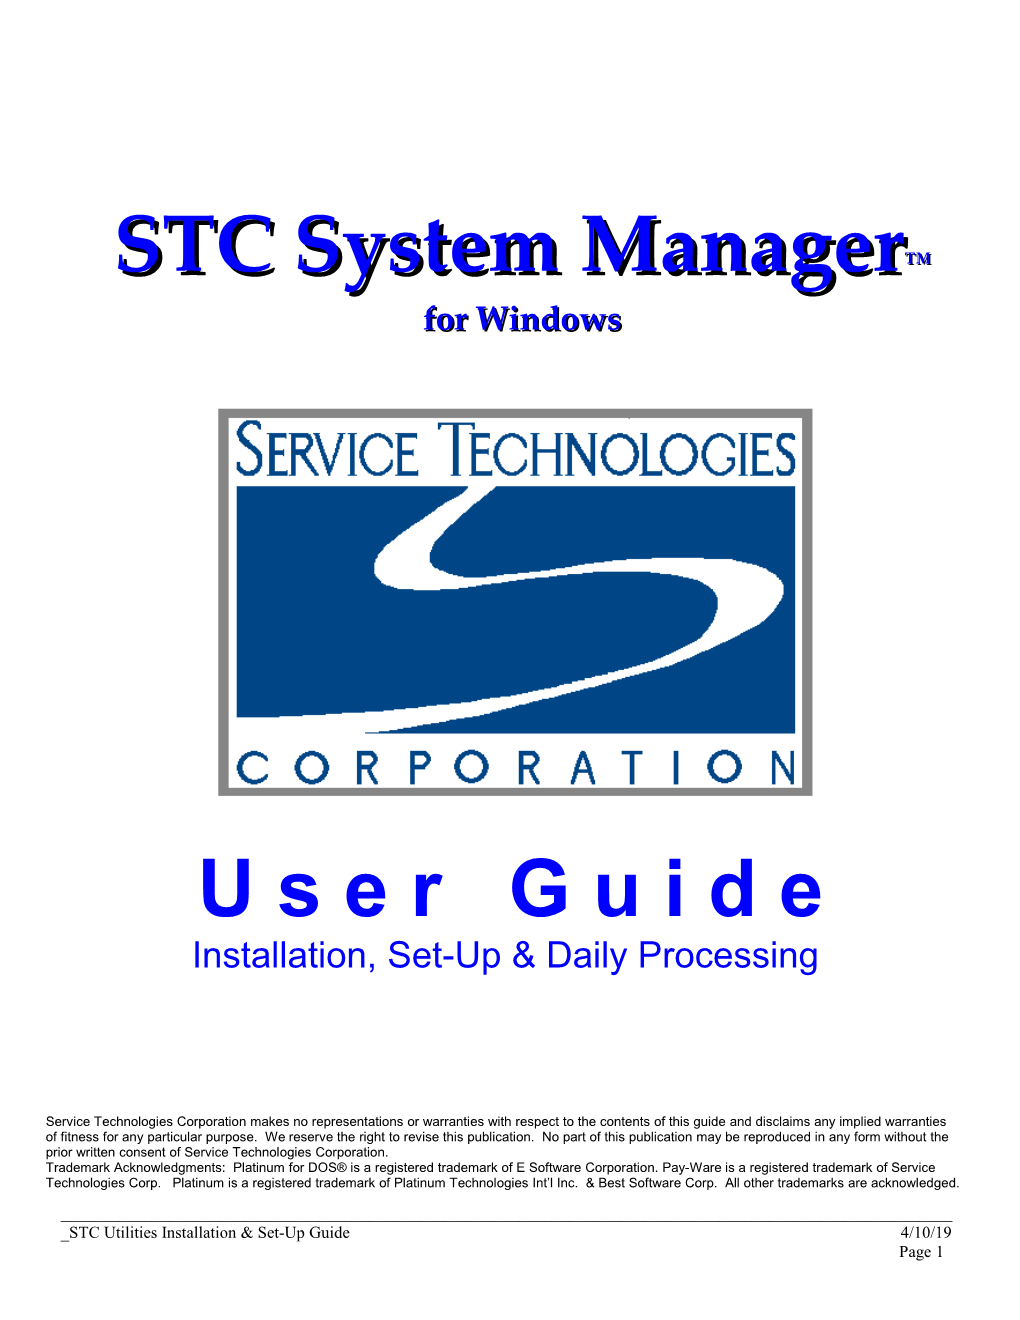 STC System Manager for Windows